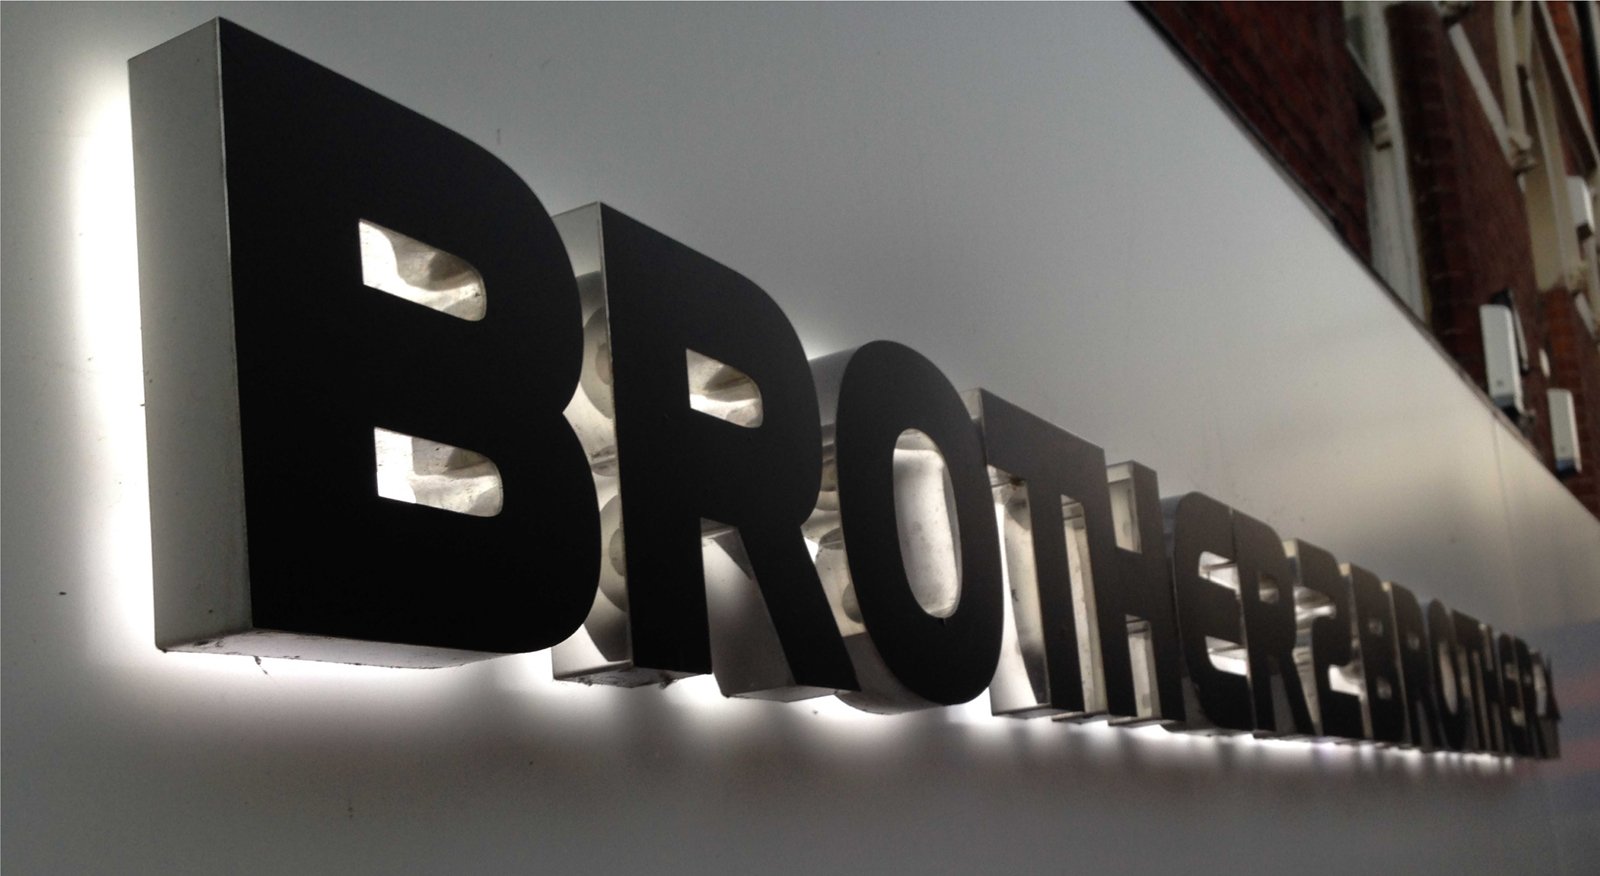 BrotherBrother Signage - Sign Printing and Installation by Envirosigns Ltd